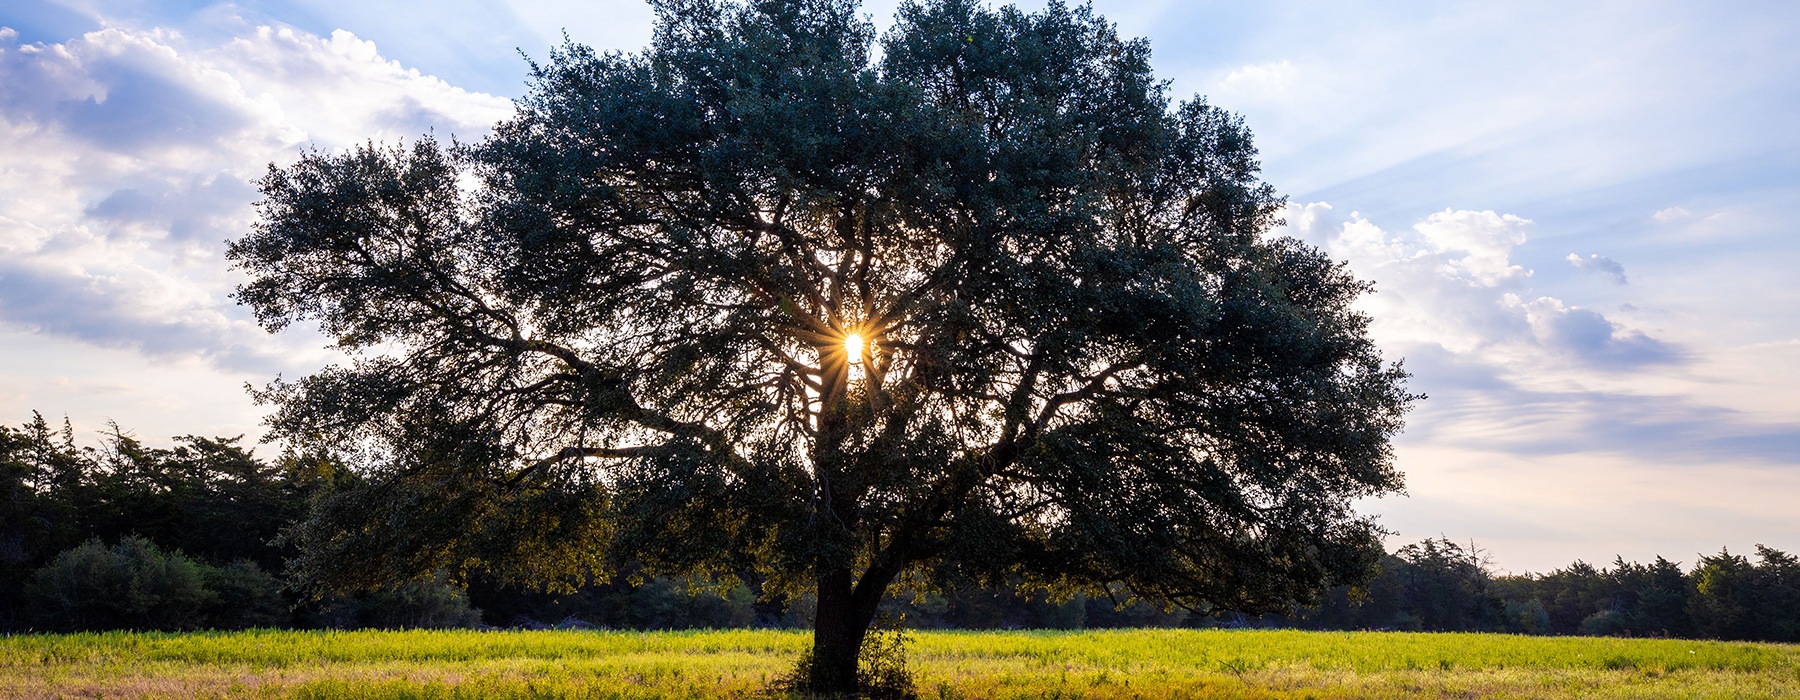 lifestyle image of a large tree in a green field at sunset